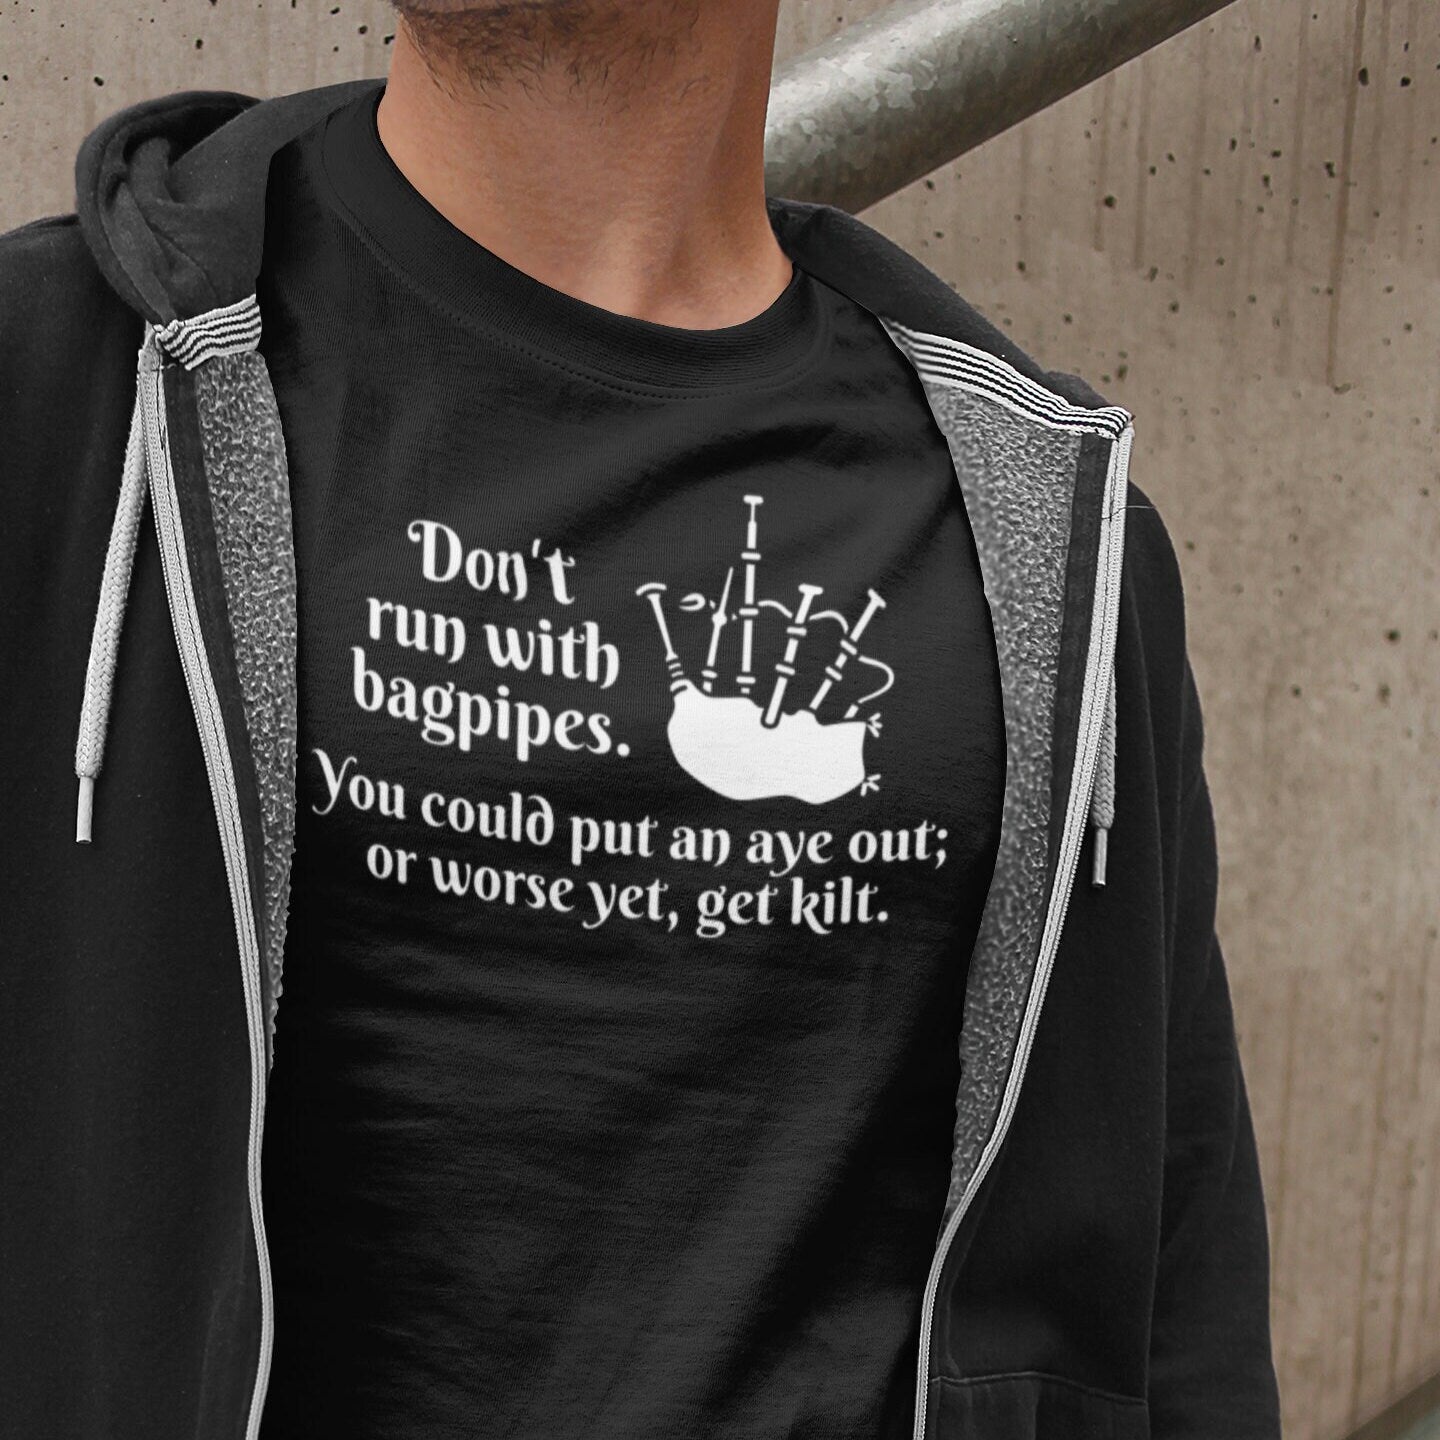 Don't run with bagpipes. T-Shirt